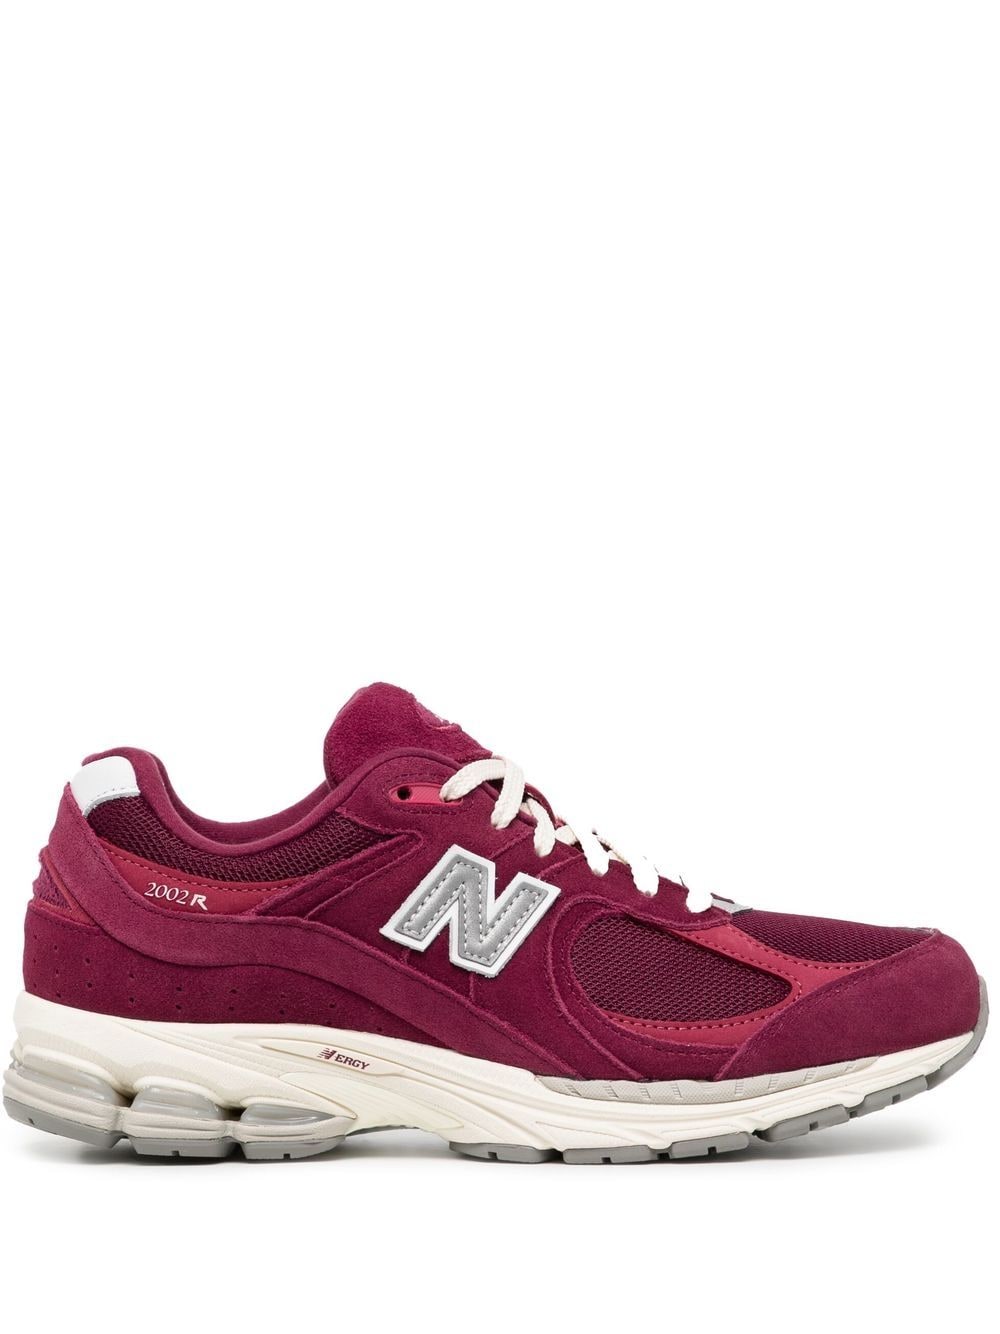 New Balance 2002R "Bordeaux" sneakers - Red